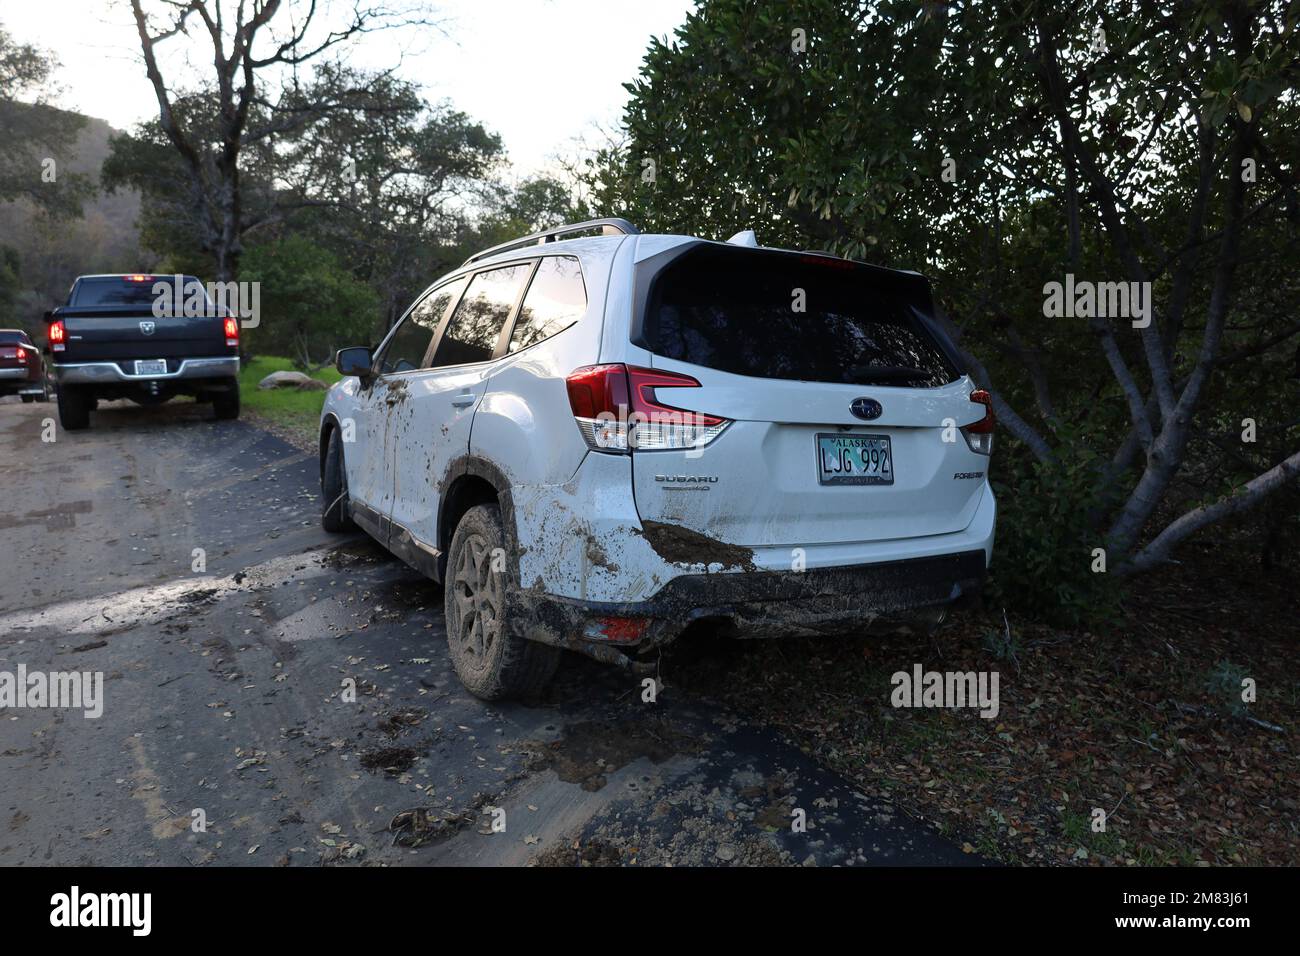 Santa Barbara, California, U.S.A. 11th Jan, 2023. A white, 2019 Suburu Forester on January 11, 2023, with All-wheel drive and X-Mode activated, was no match for a mountain stream that gushed across the Rancho Oso Horse Ranch and Campground driveway in the Los Padres National Forest. T.Context: The Santa Barbara Fire department pulled it out of the muck and parked it out of the way of other vehicles, but a tow truck has not been able to reach it. AAA Insurance agents have not been able to have it inspected, but expect it will be a total loss, as one explained, 'When a newer car is submerg Stock Photo